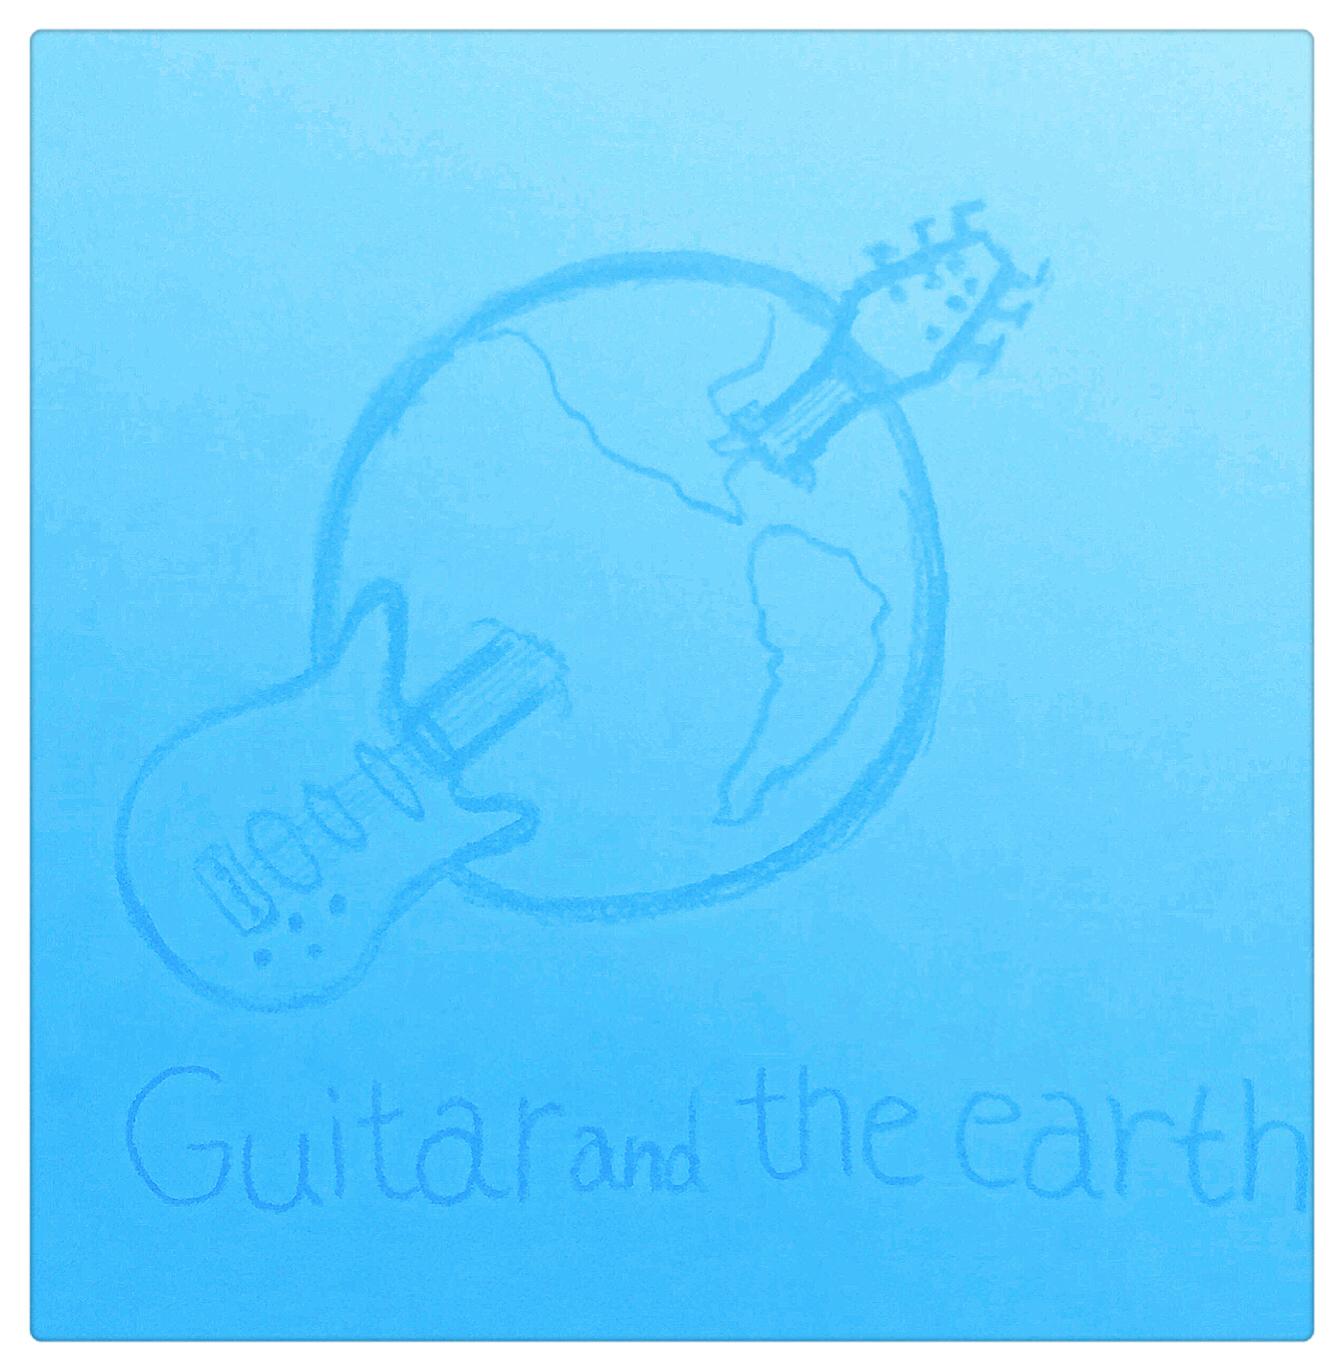 Guitar and the earth